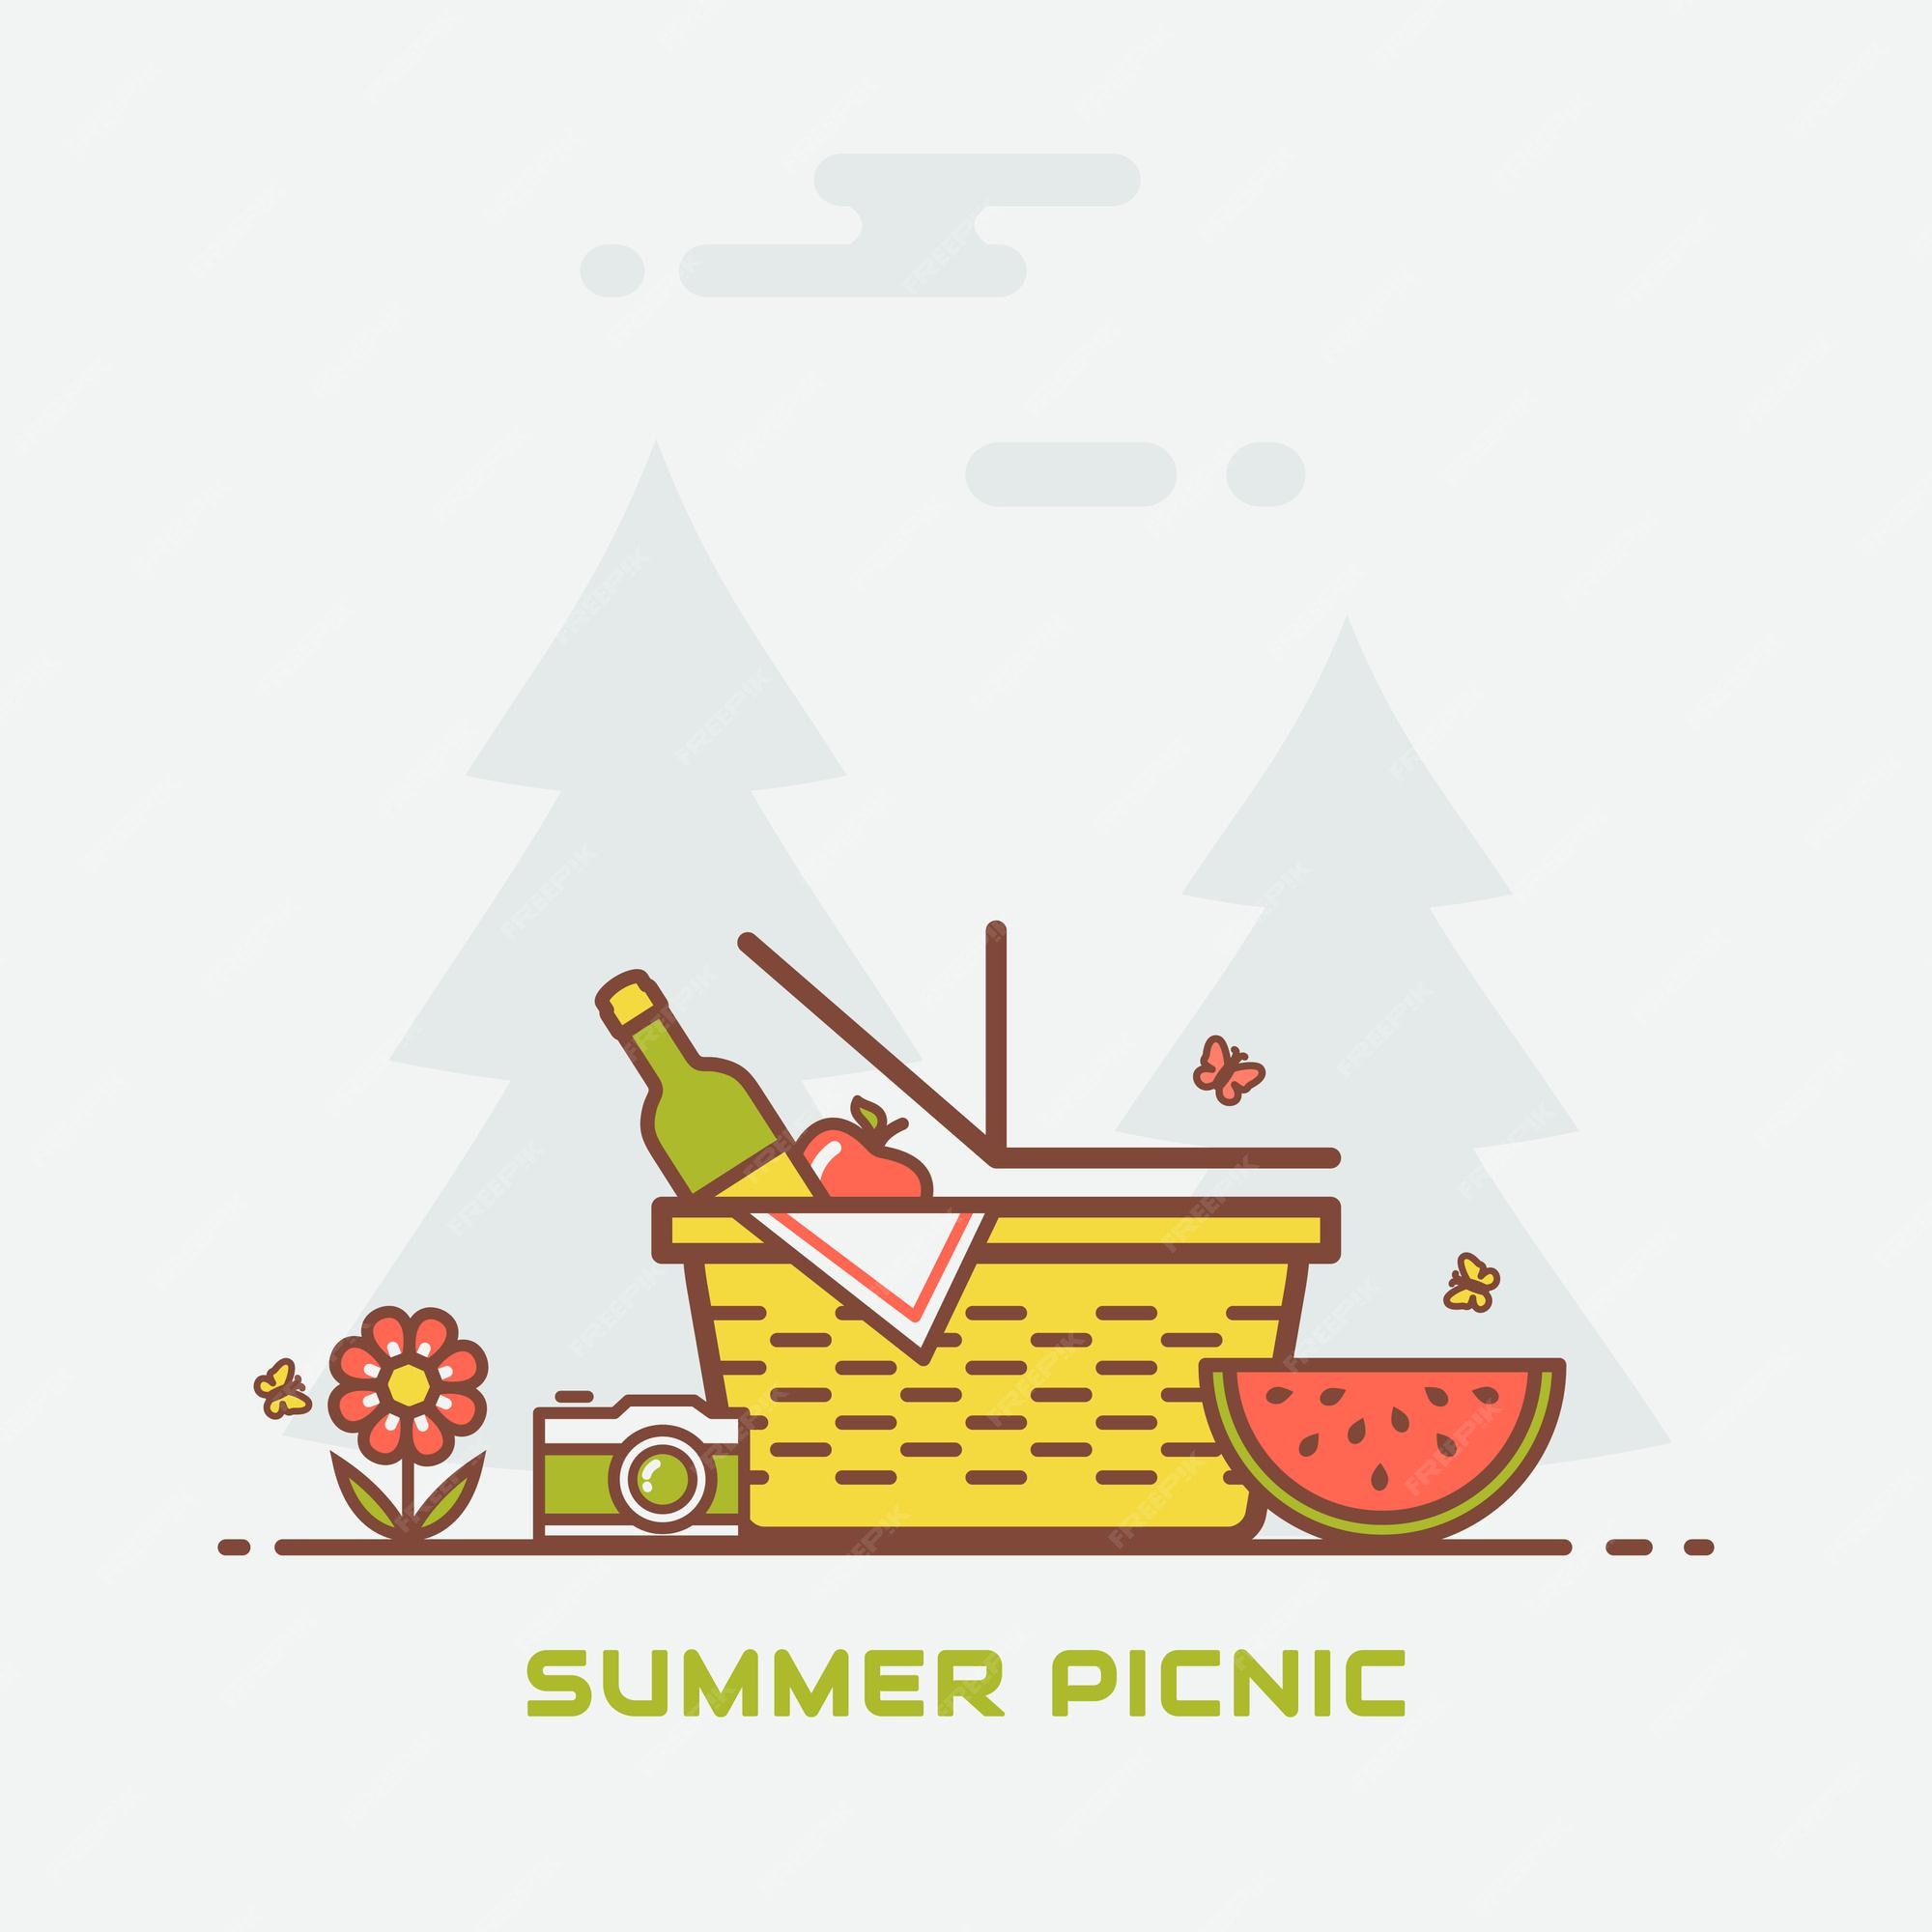 Premium Vector | Summer picnic in nature. vector banner with basket, wine,  apple, watermelon, butterflies, camera and with trees on background.  colorful modern line illustration.